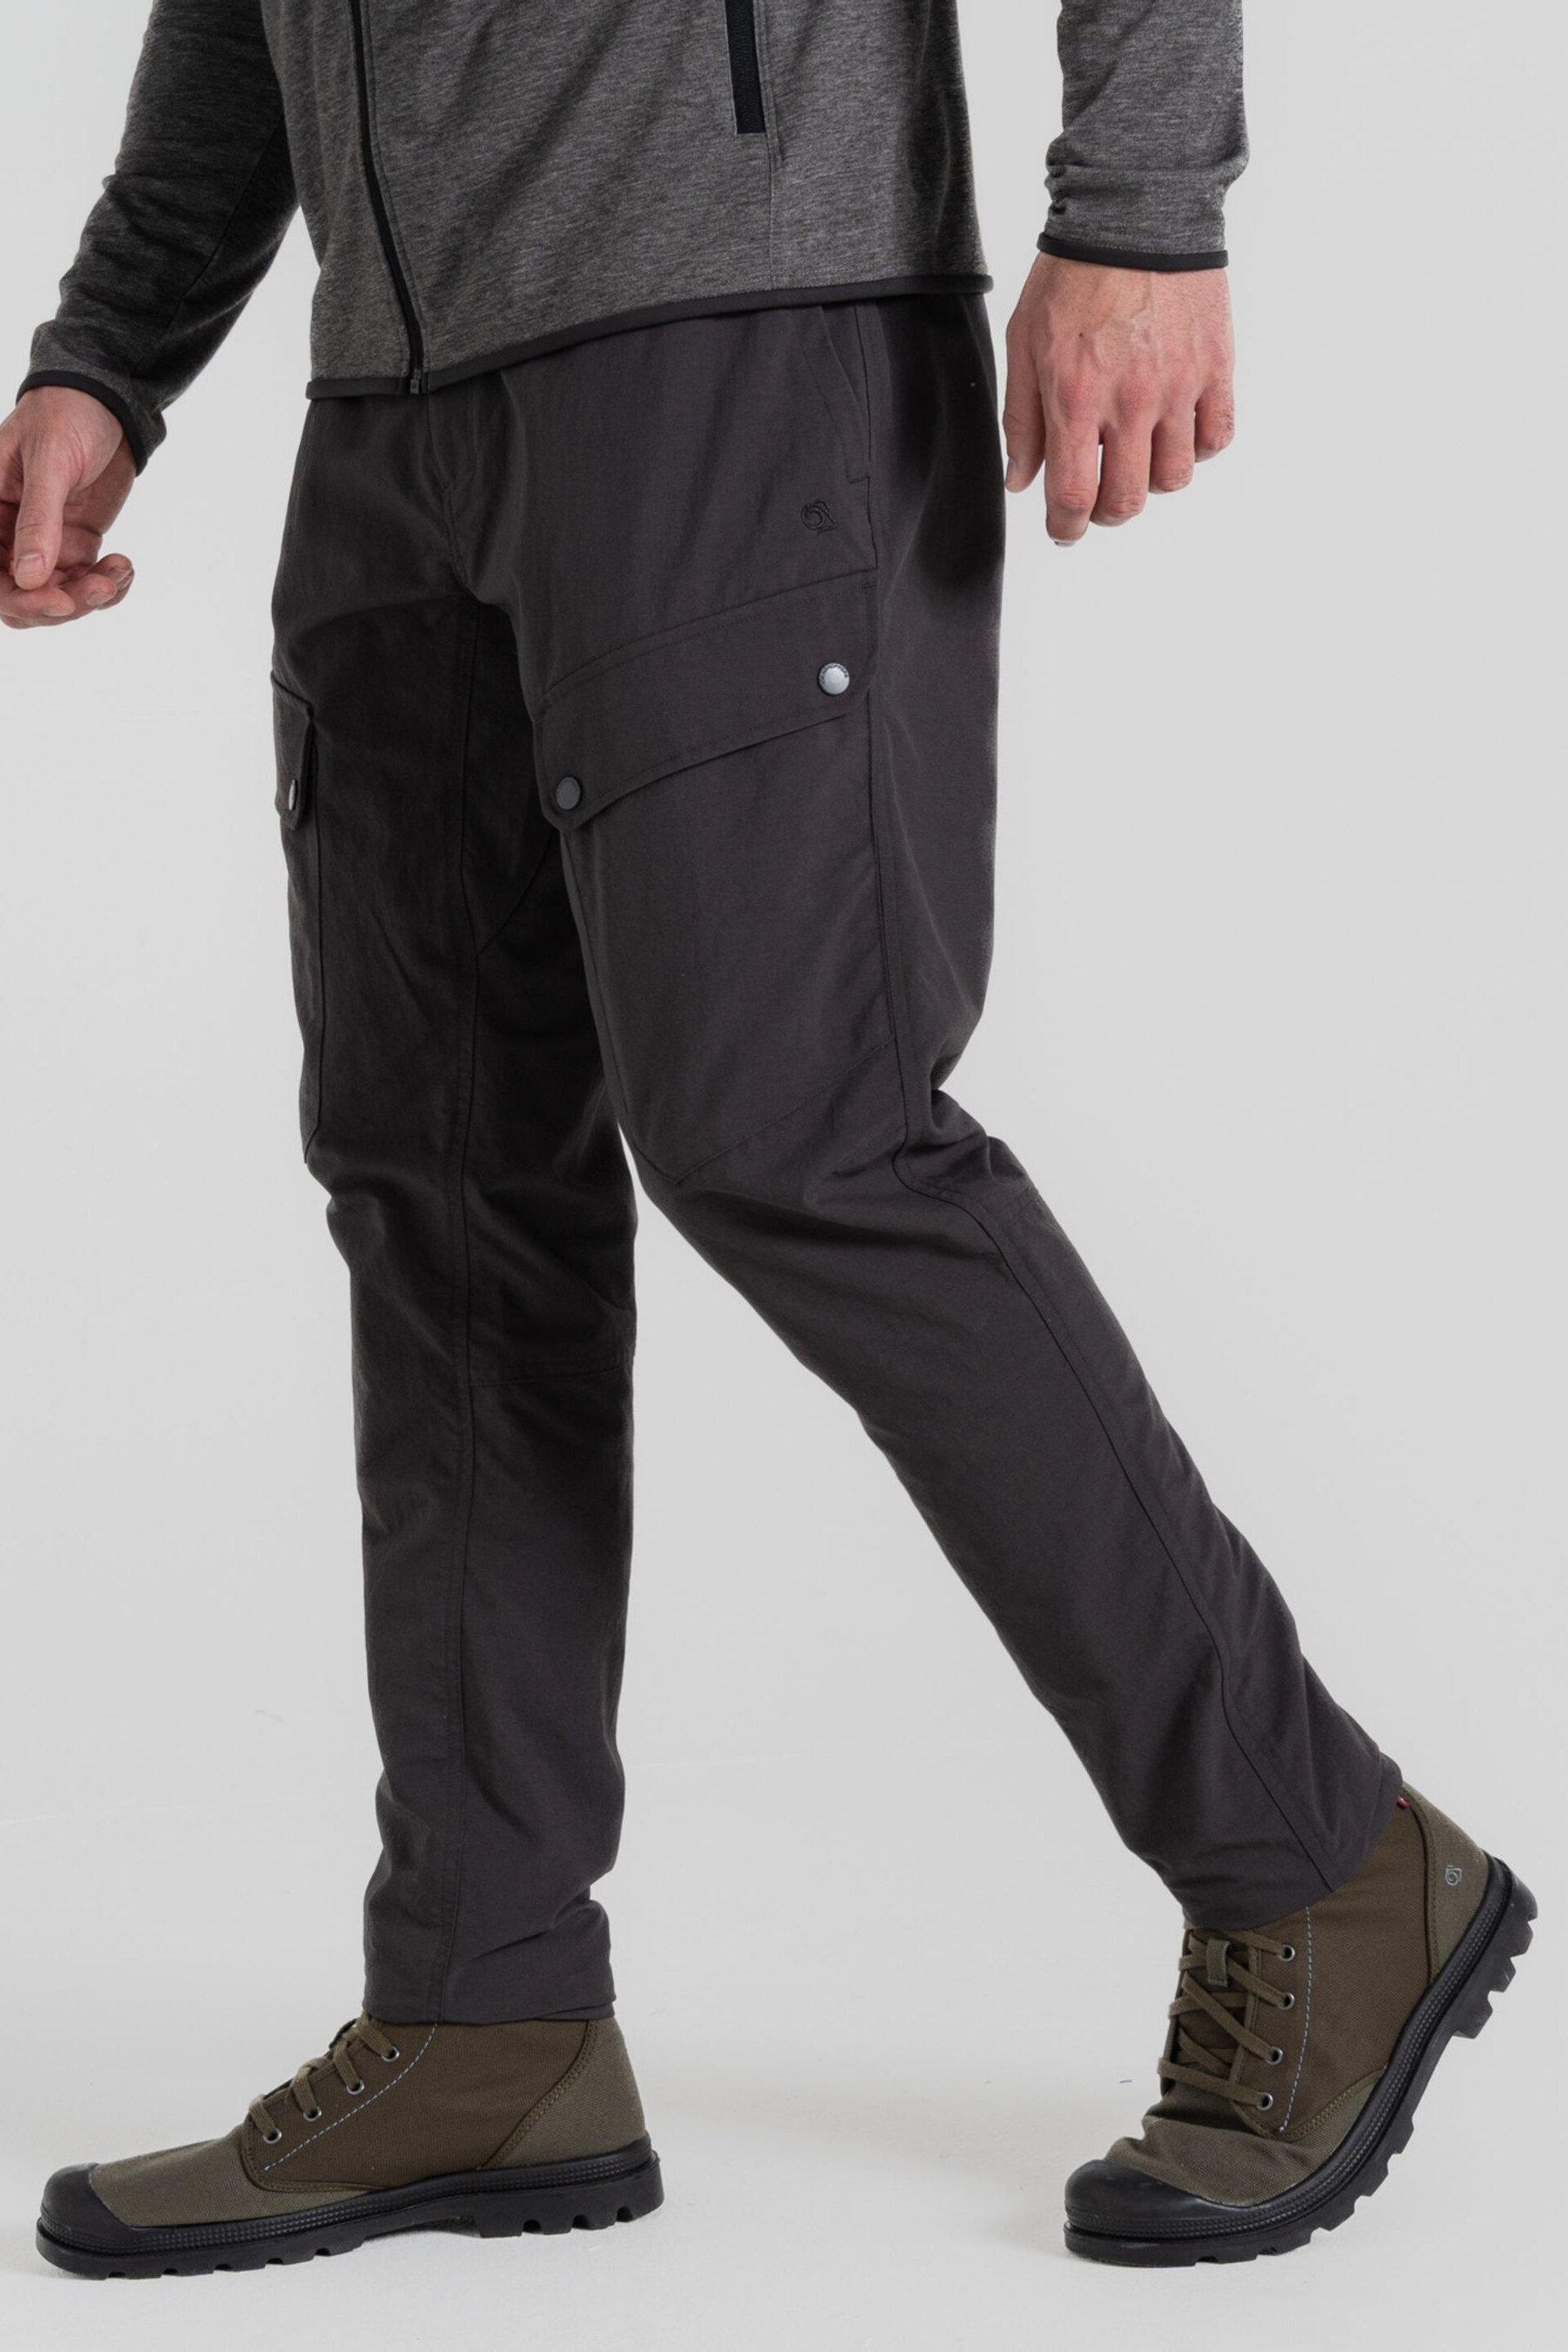 Craghoppers Black NL Adventure Trousers III - Image 3 of 7